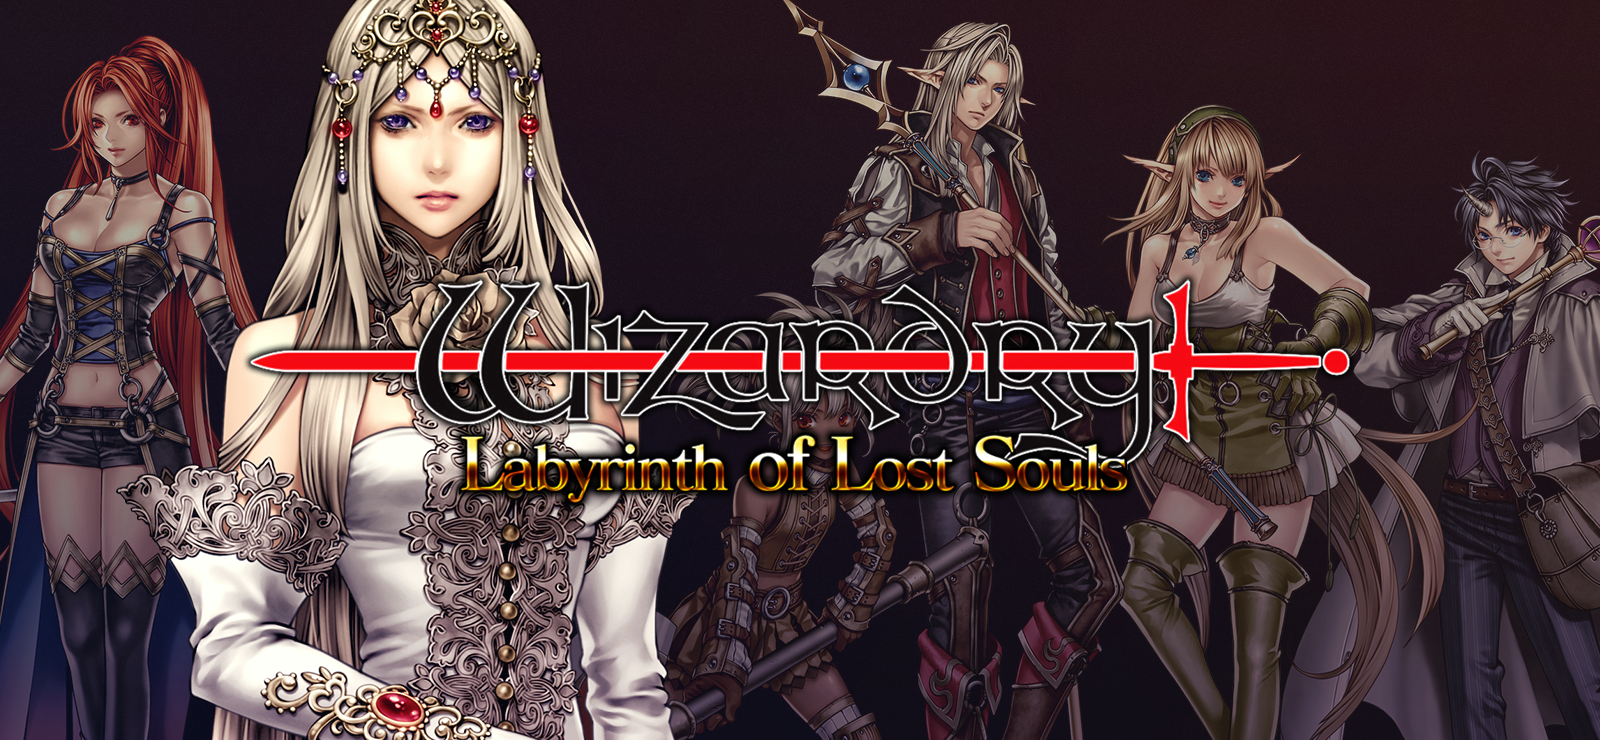 Wizardry: Labyrinth Of Lost Souls